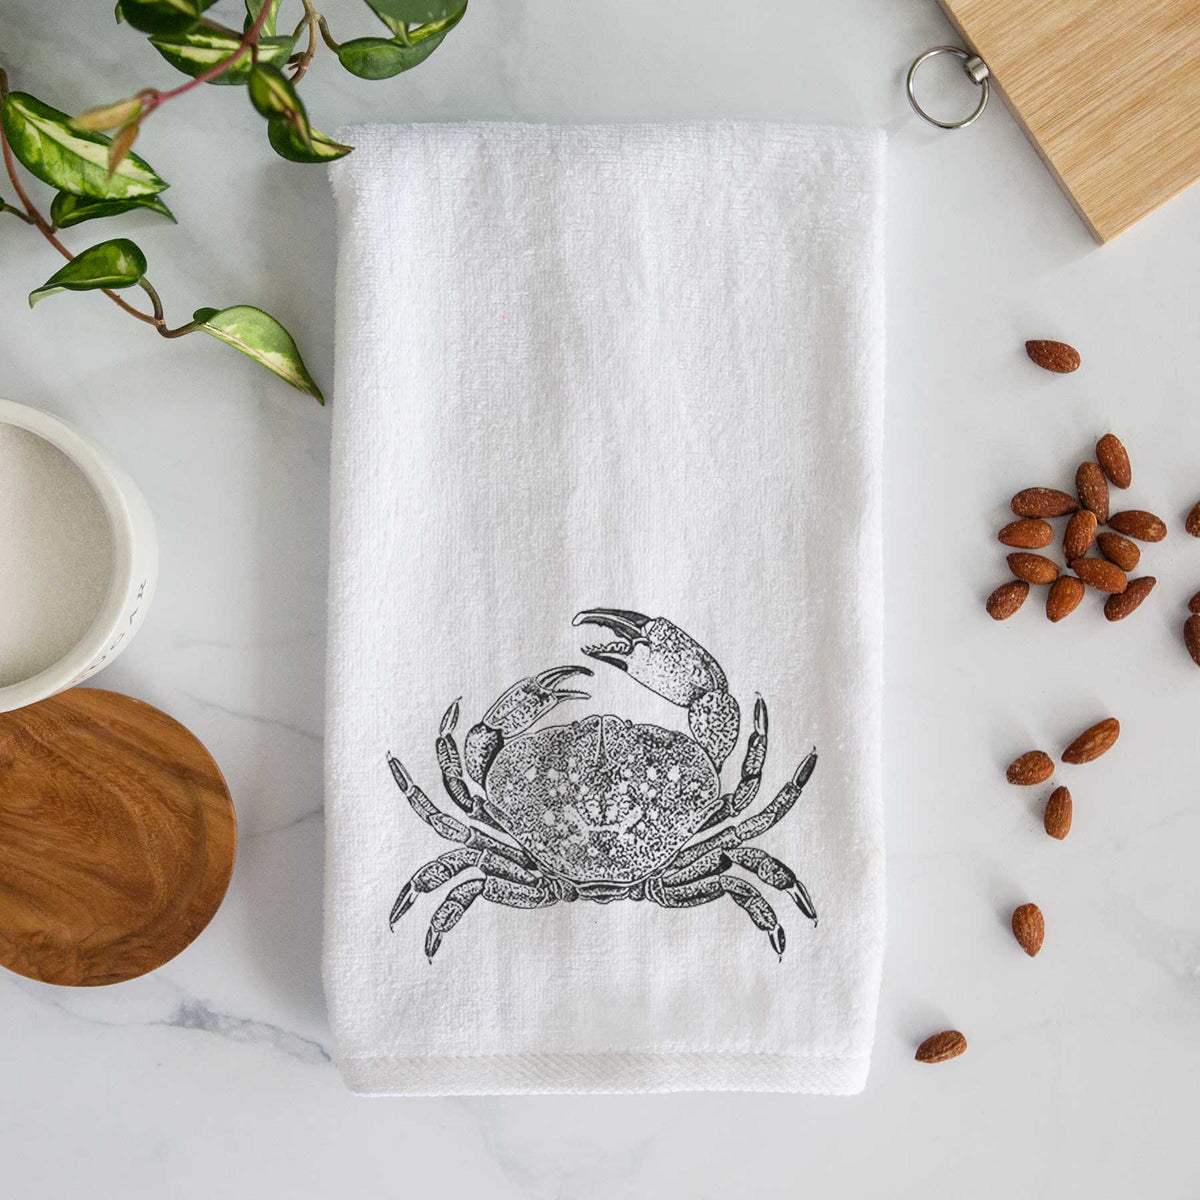 Dungeness Crab Hand Towel